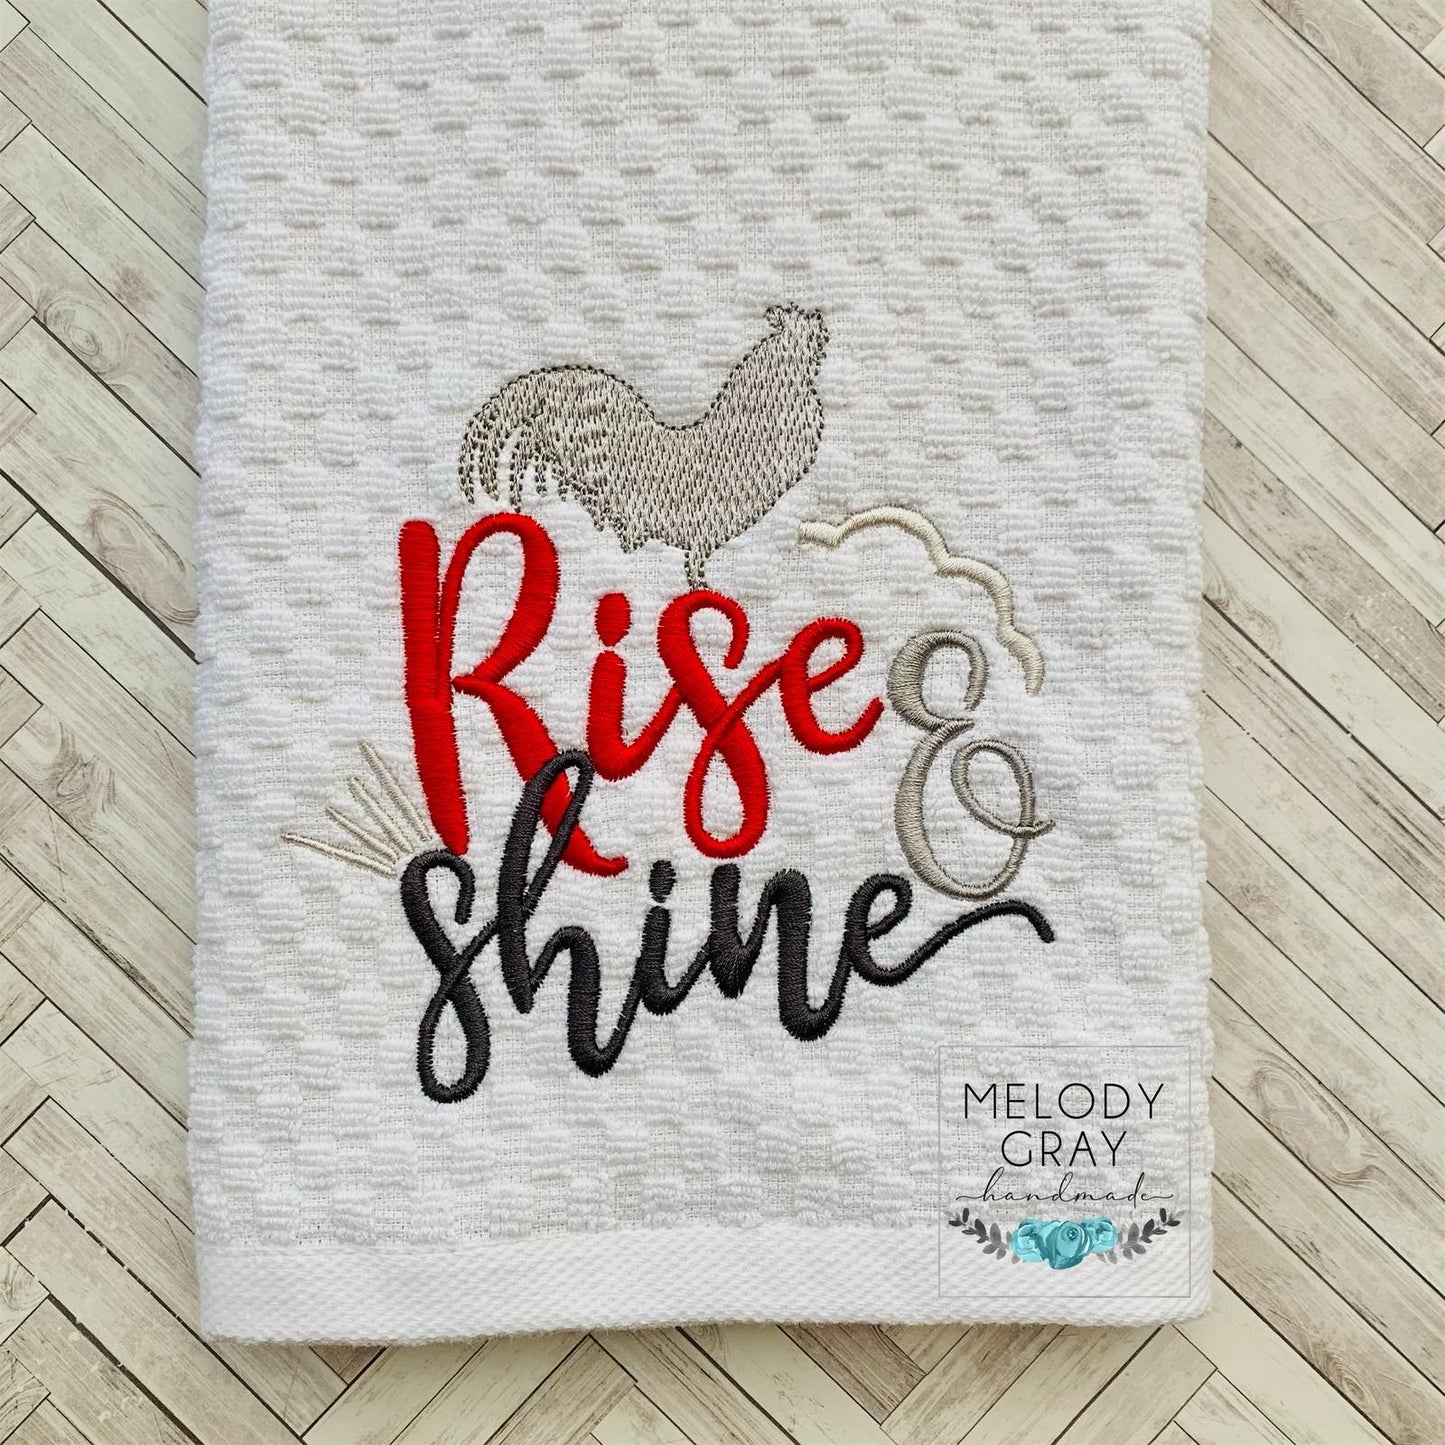 Rise and Shine - 3 sizes- Digital Embroidery Design